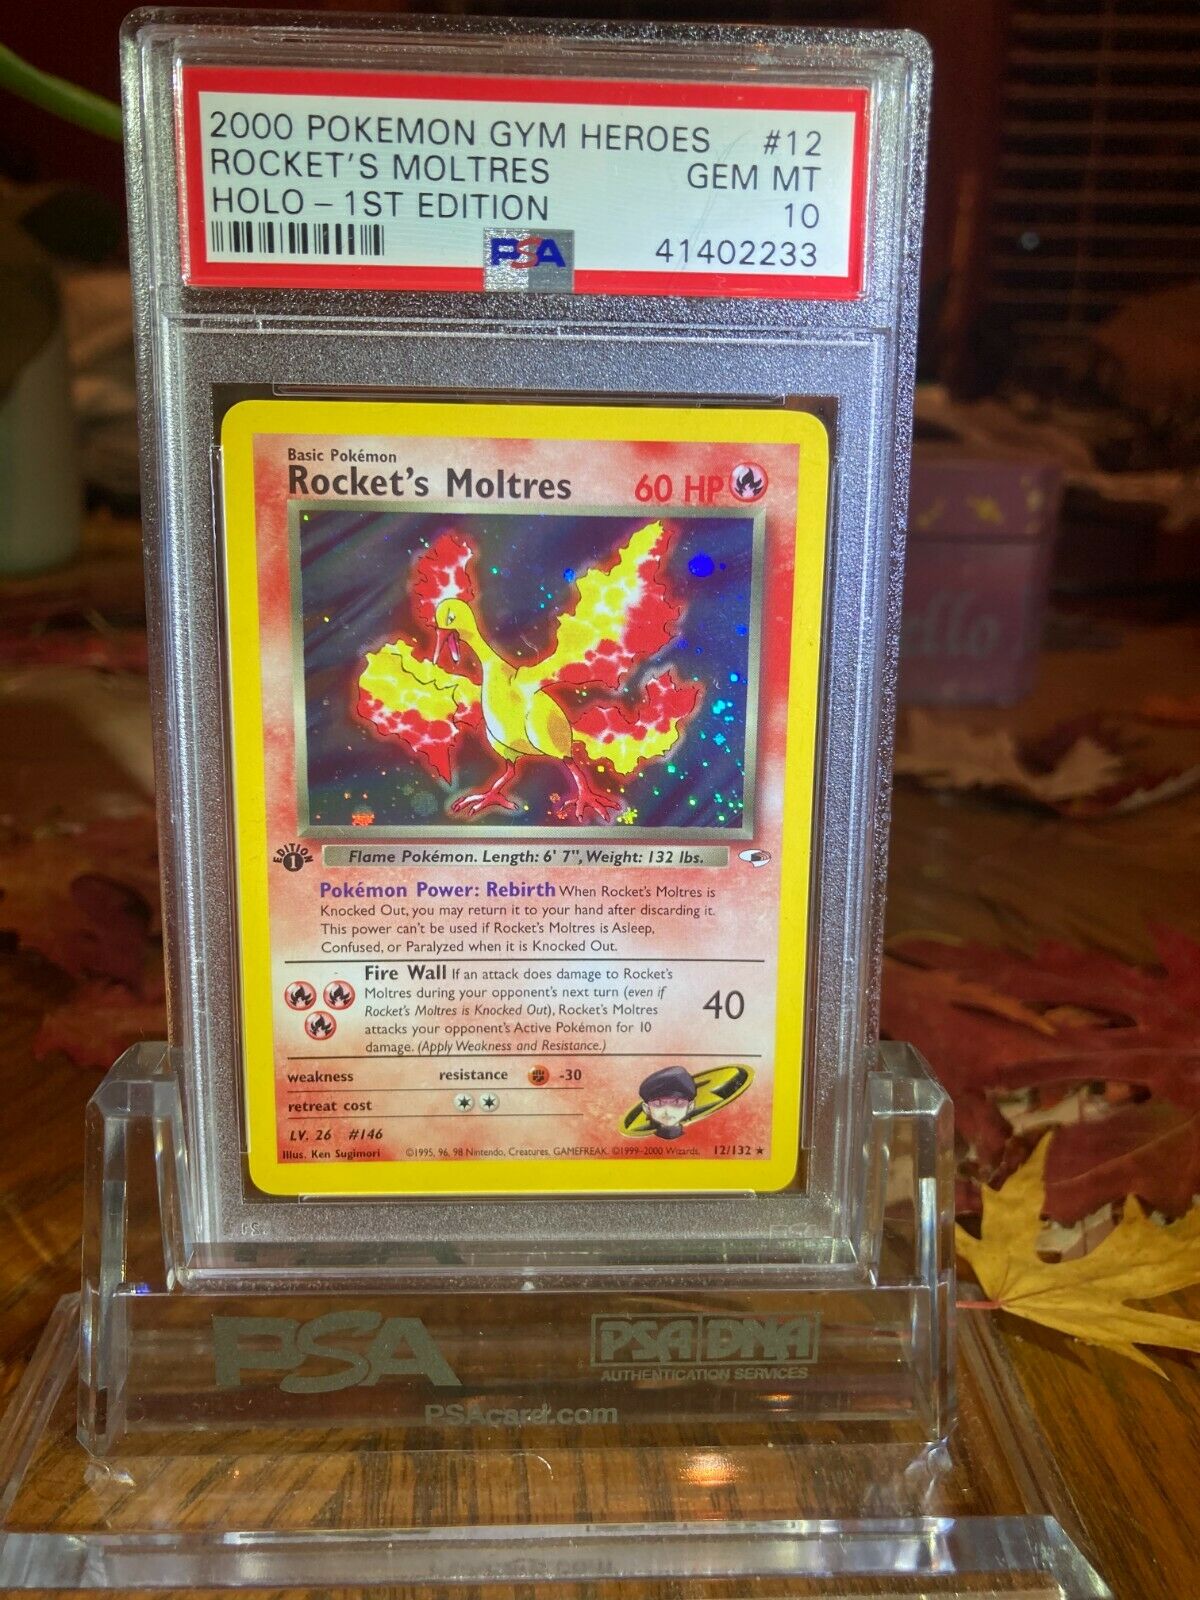 Pokemon Gym Heroes 1st edition  12132 Rockets Moltres holo card PSA 10